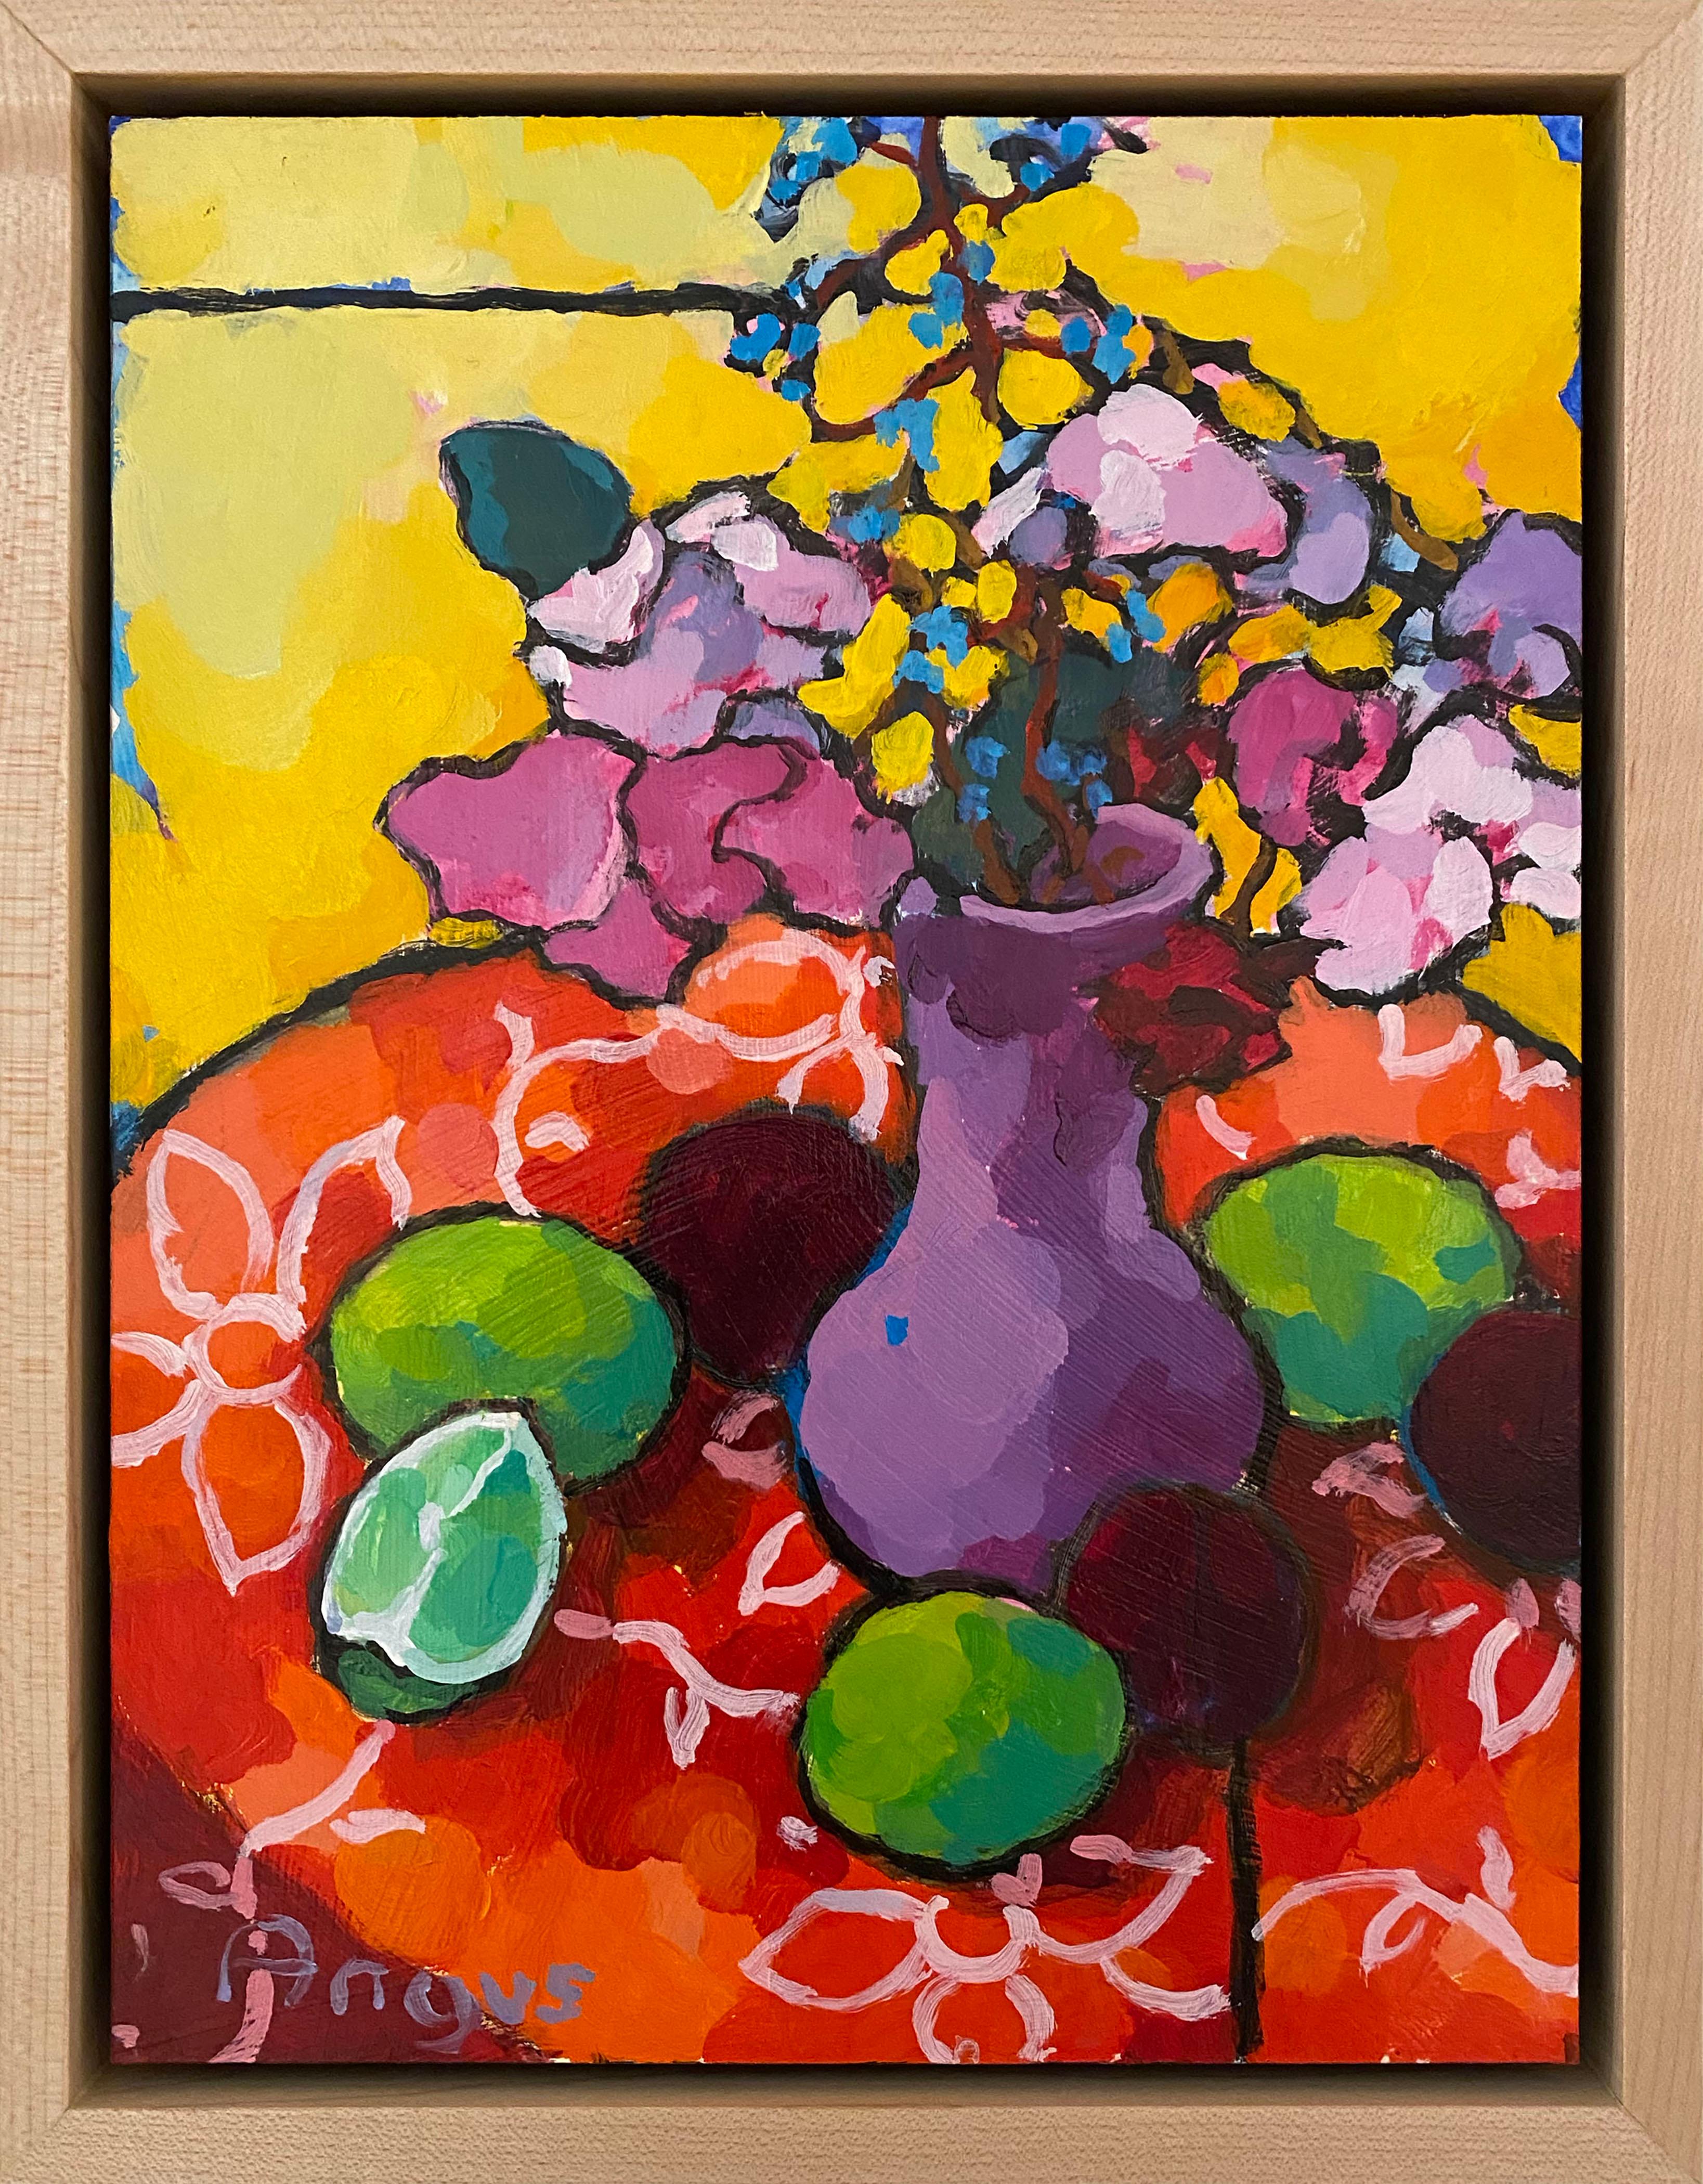 Collection of Limes and Plums Study (still life, fruit, purple, yellow, pink) - Painting by Angus Wilson